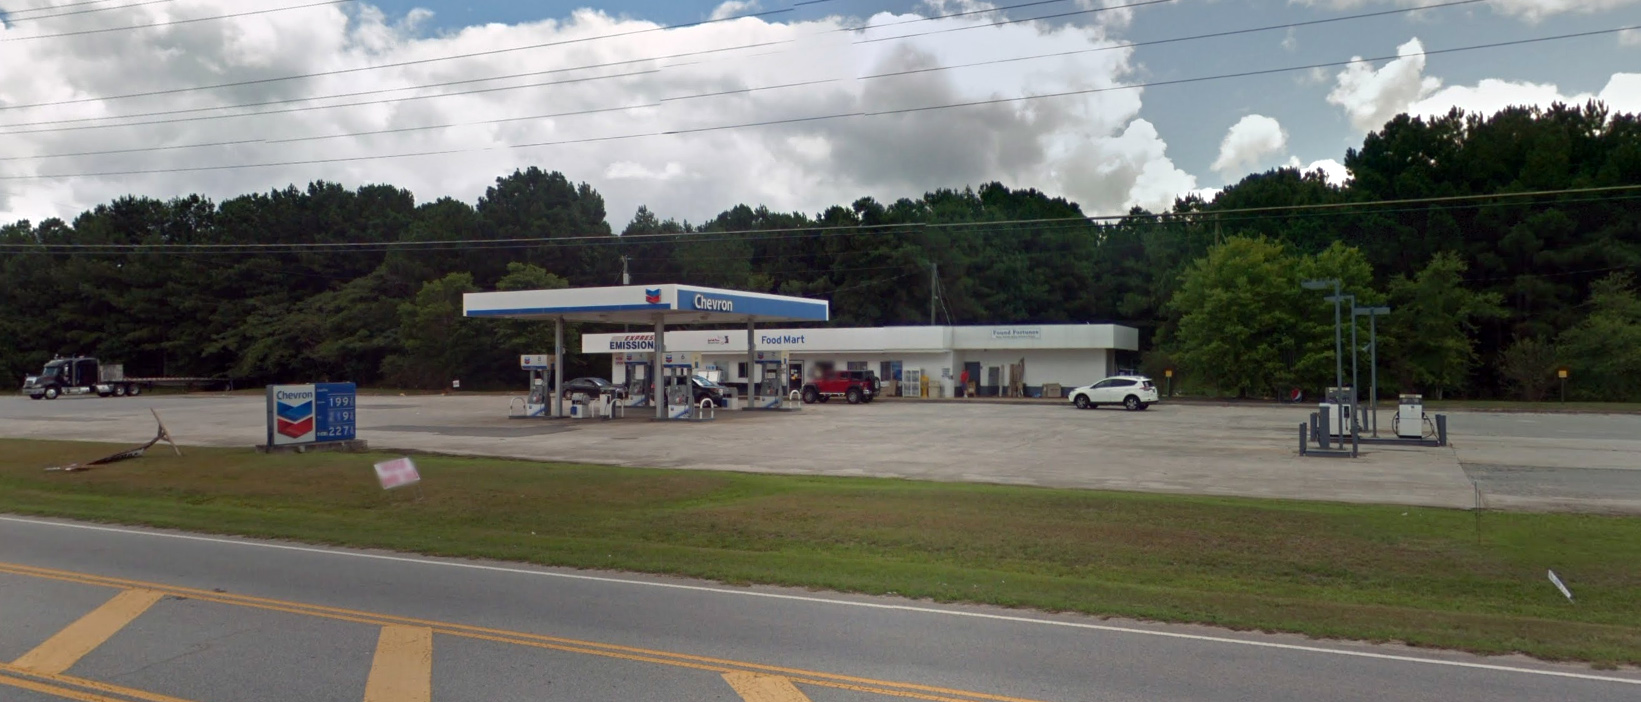 PHOTO: A Chevron gas station in Fayetteville, Ga., is pictured in a Google Street View image from July 2016.